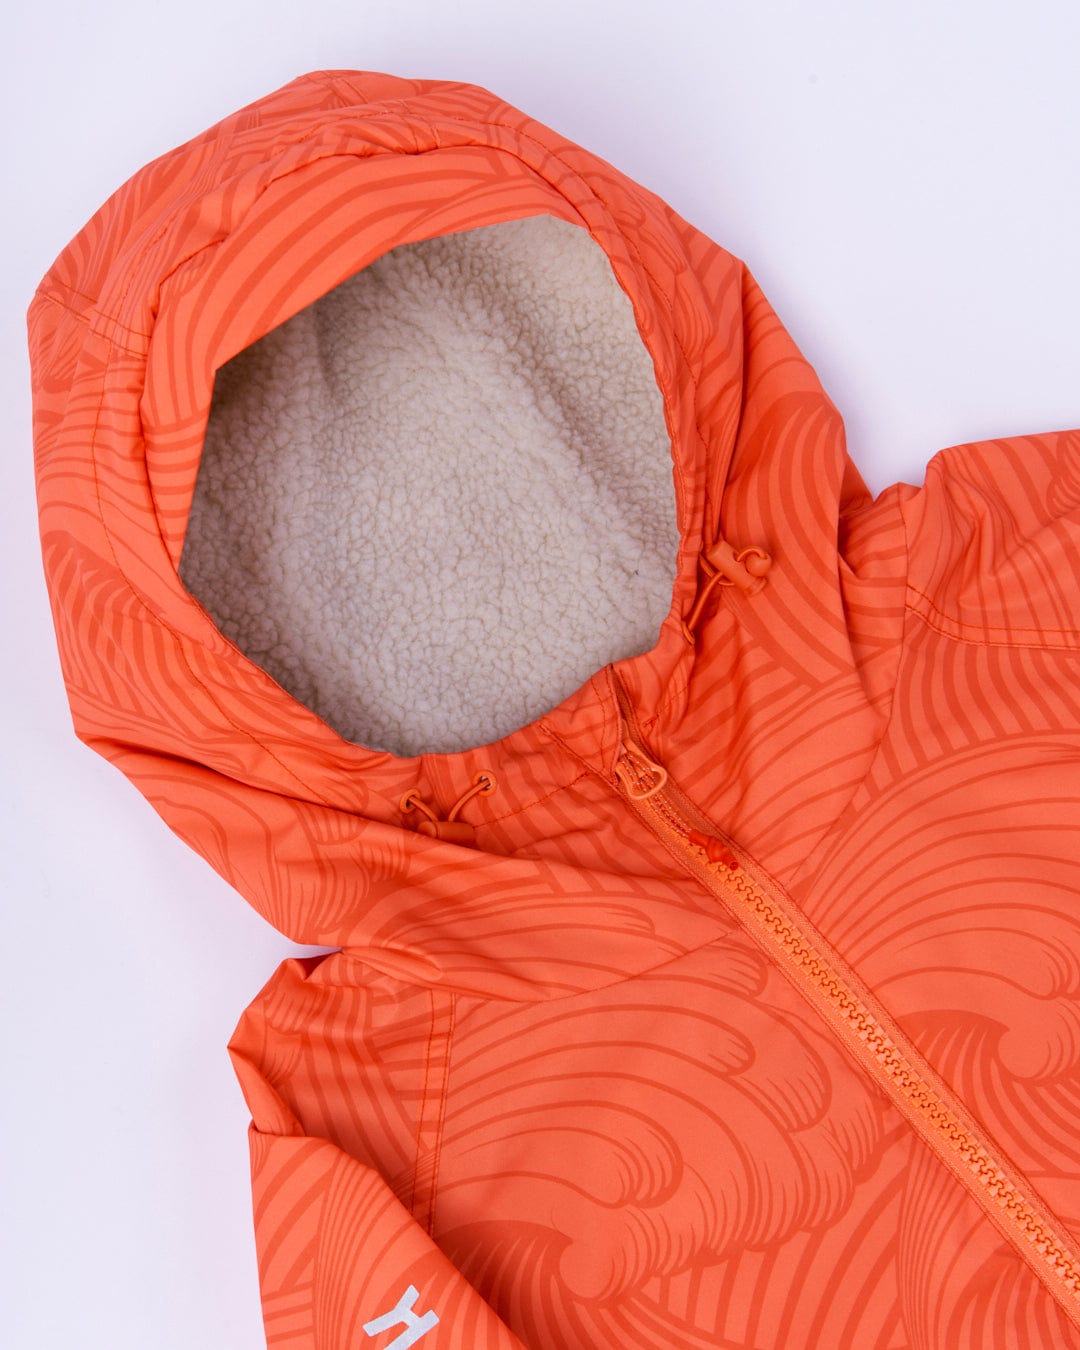 Light Orange hooded jacket made from 3K waterproof ripstop, with patterned design and fleece lining, displayed on a white background.